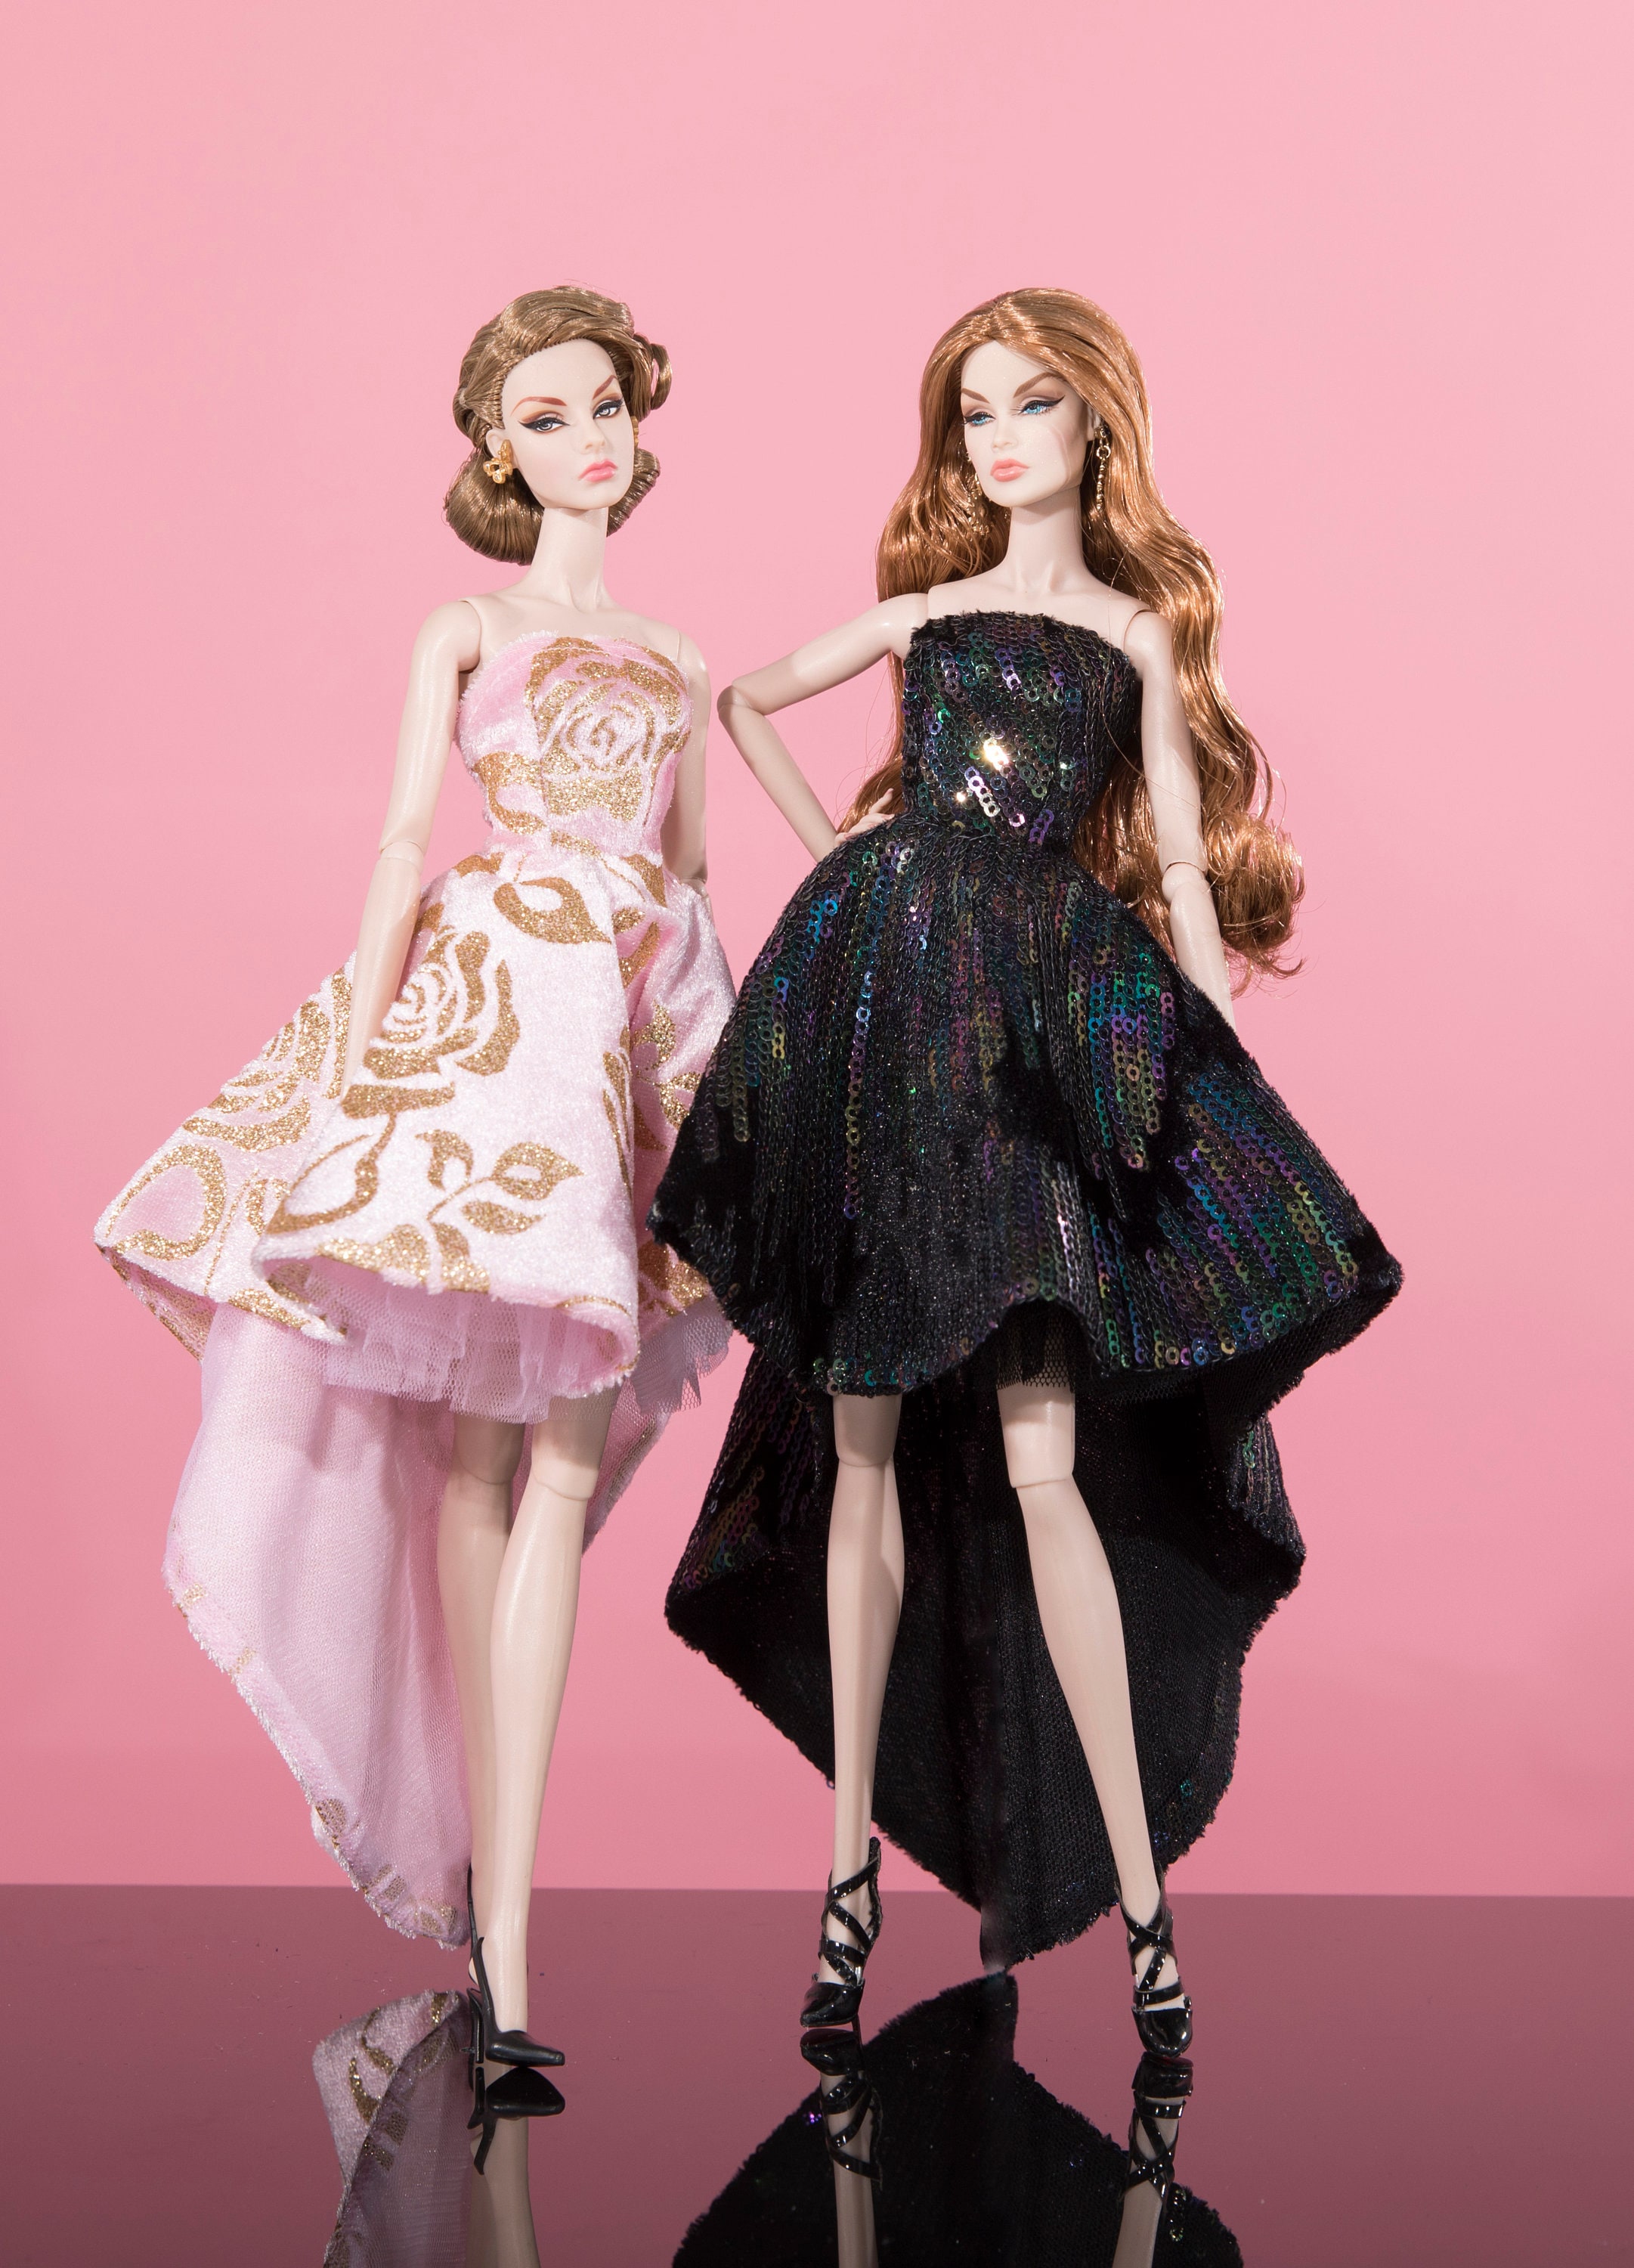 Fashion Royalty FR FR2,Poppy Parker Barbie Silkstone Doll Details about   Black Dress/outfit 